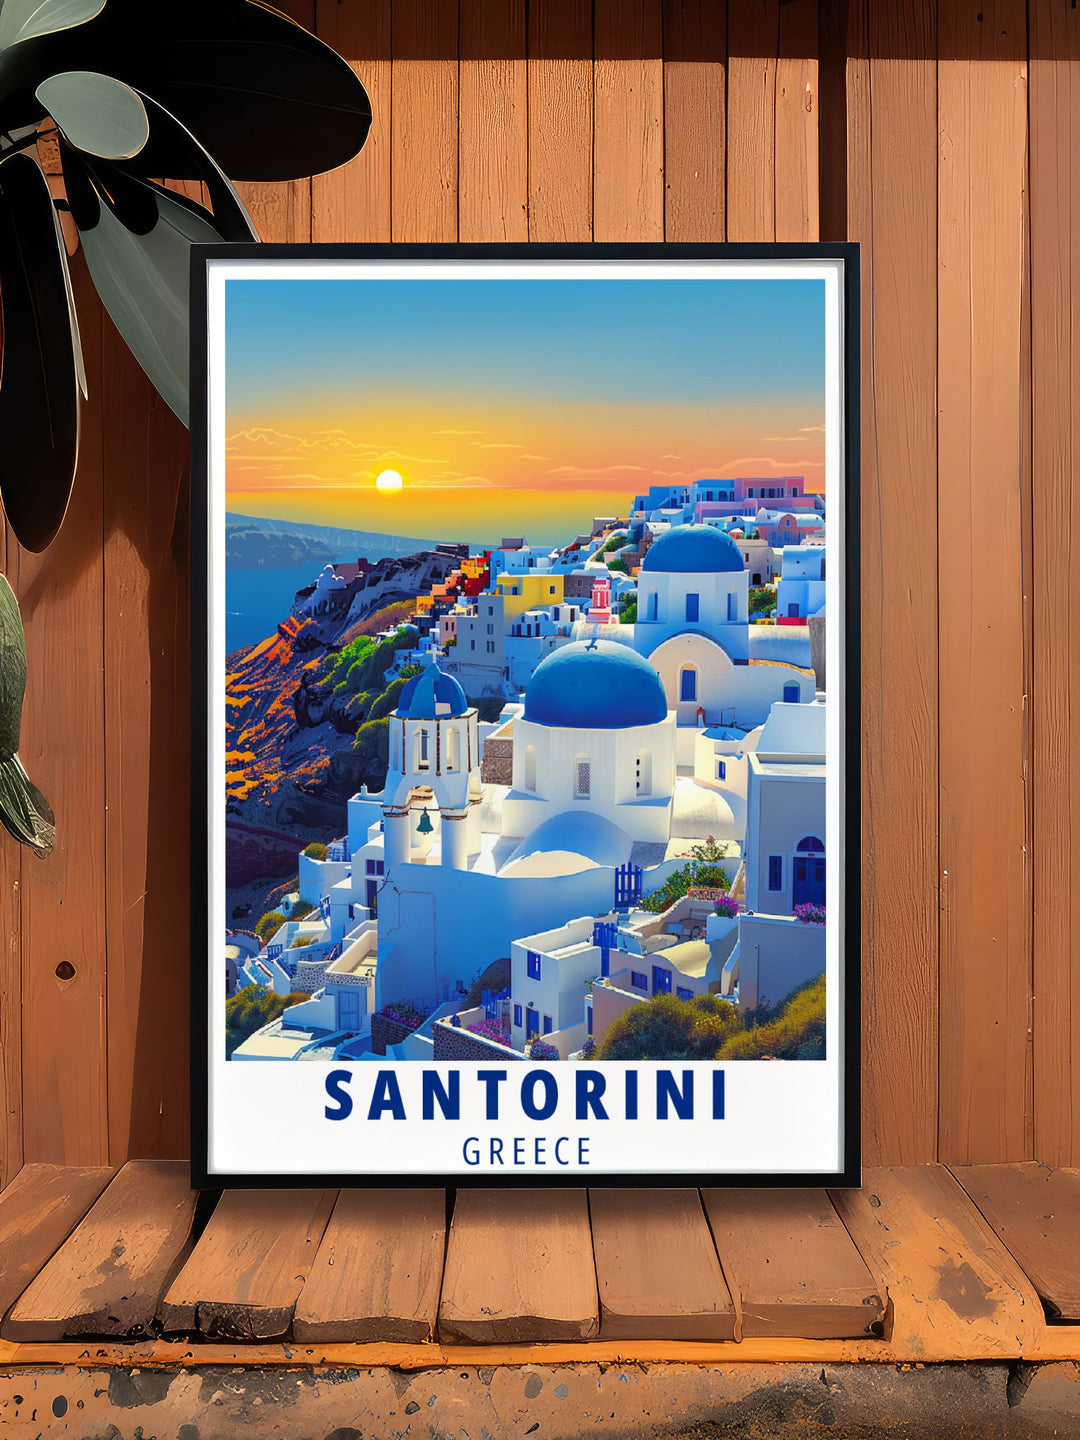 Stunning Santorini Art Print capturing the beauty of Oia, with its dramatic caldera views and whitewashed architecture. Perfect for adding Mediterranean elegance to your home.